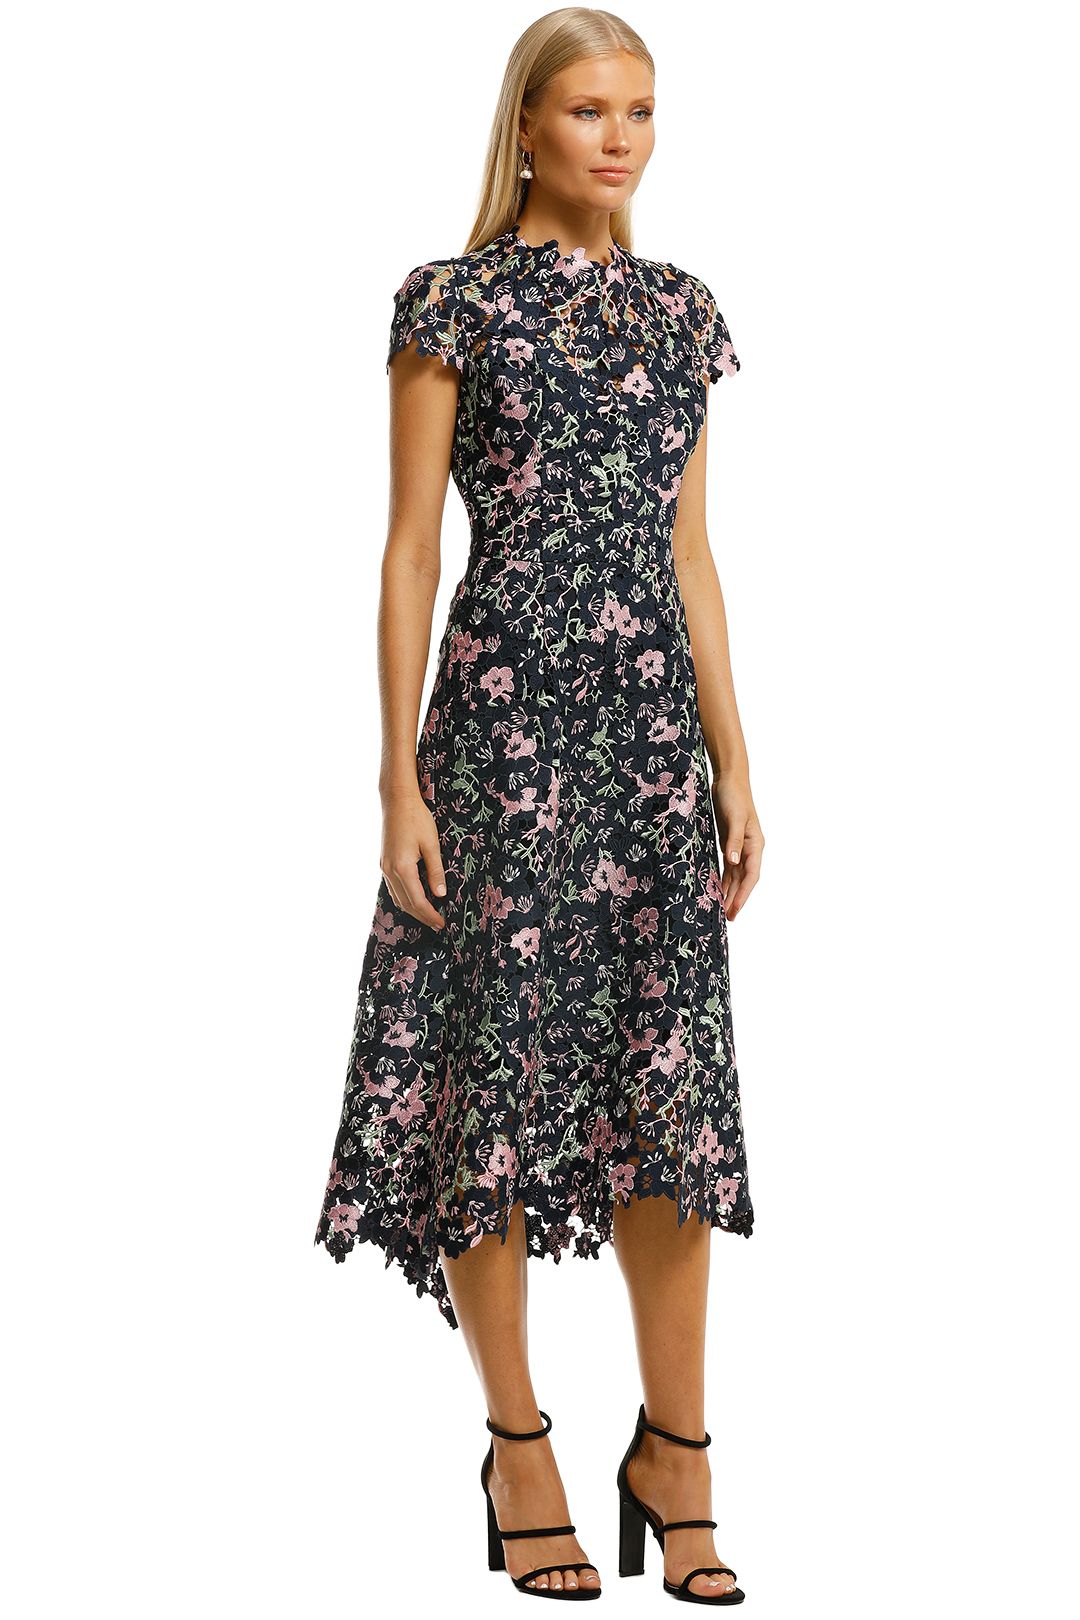 Moss-and-Spy-Birdy-Dress-Floral-Side